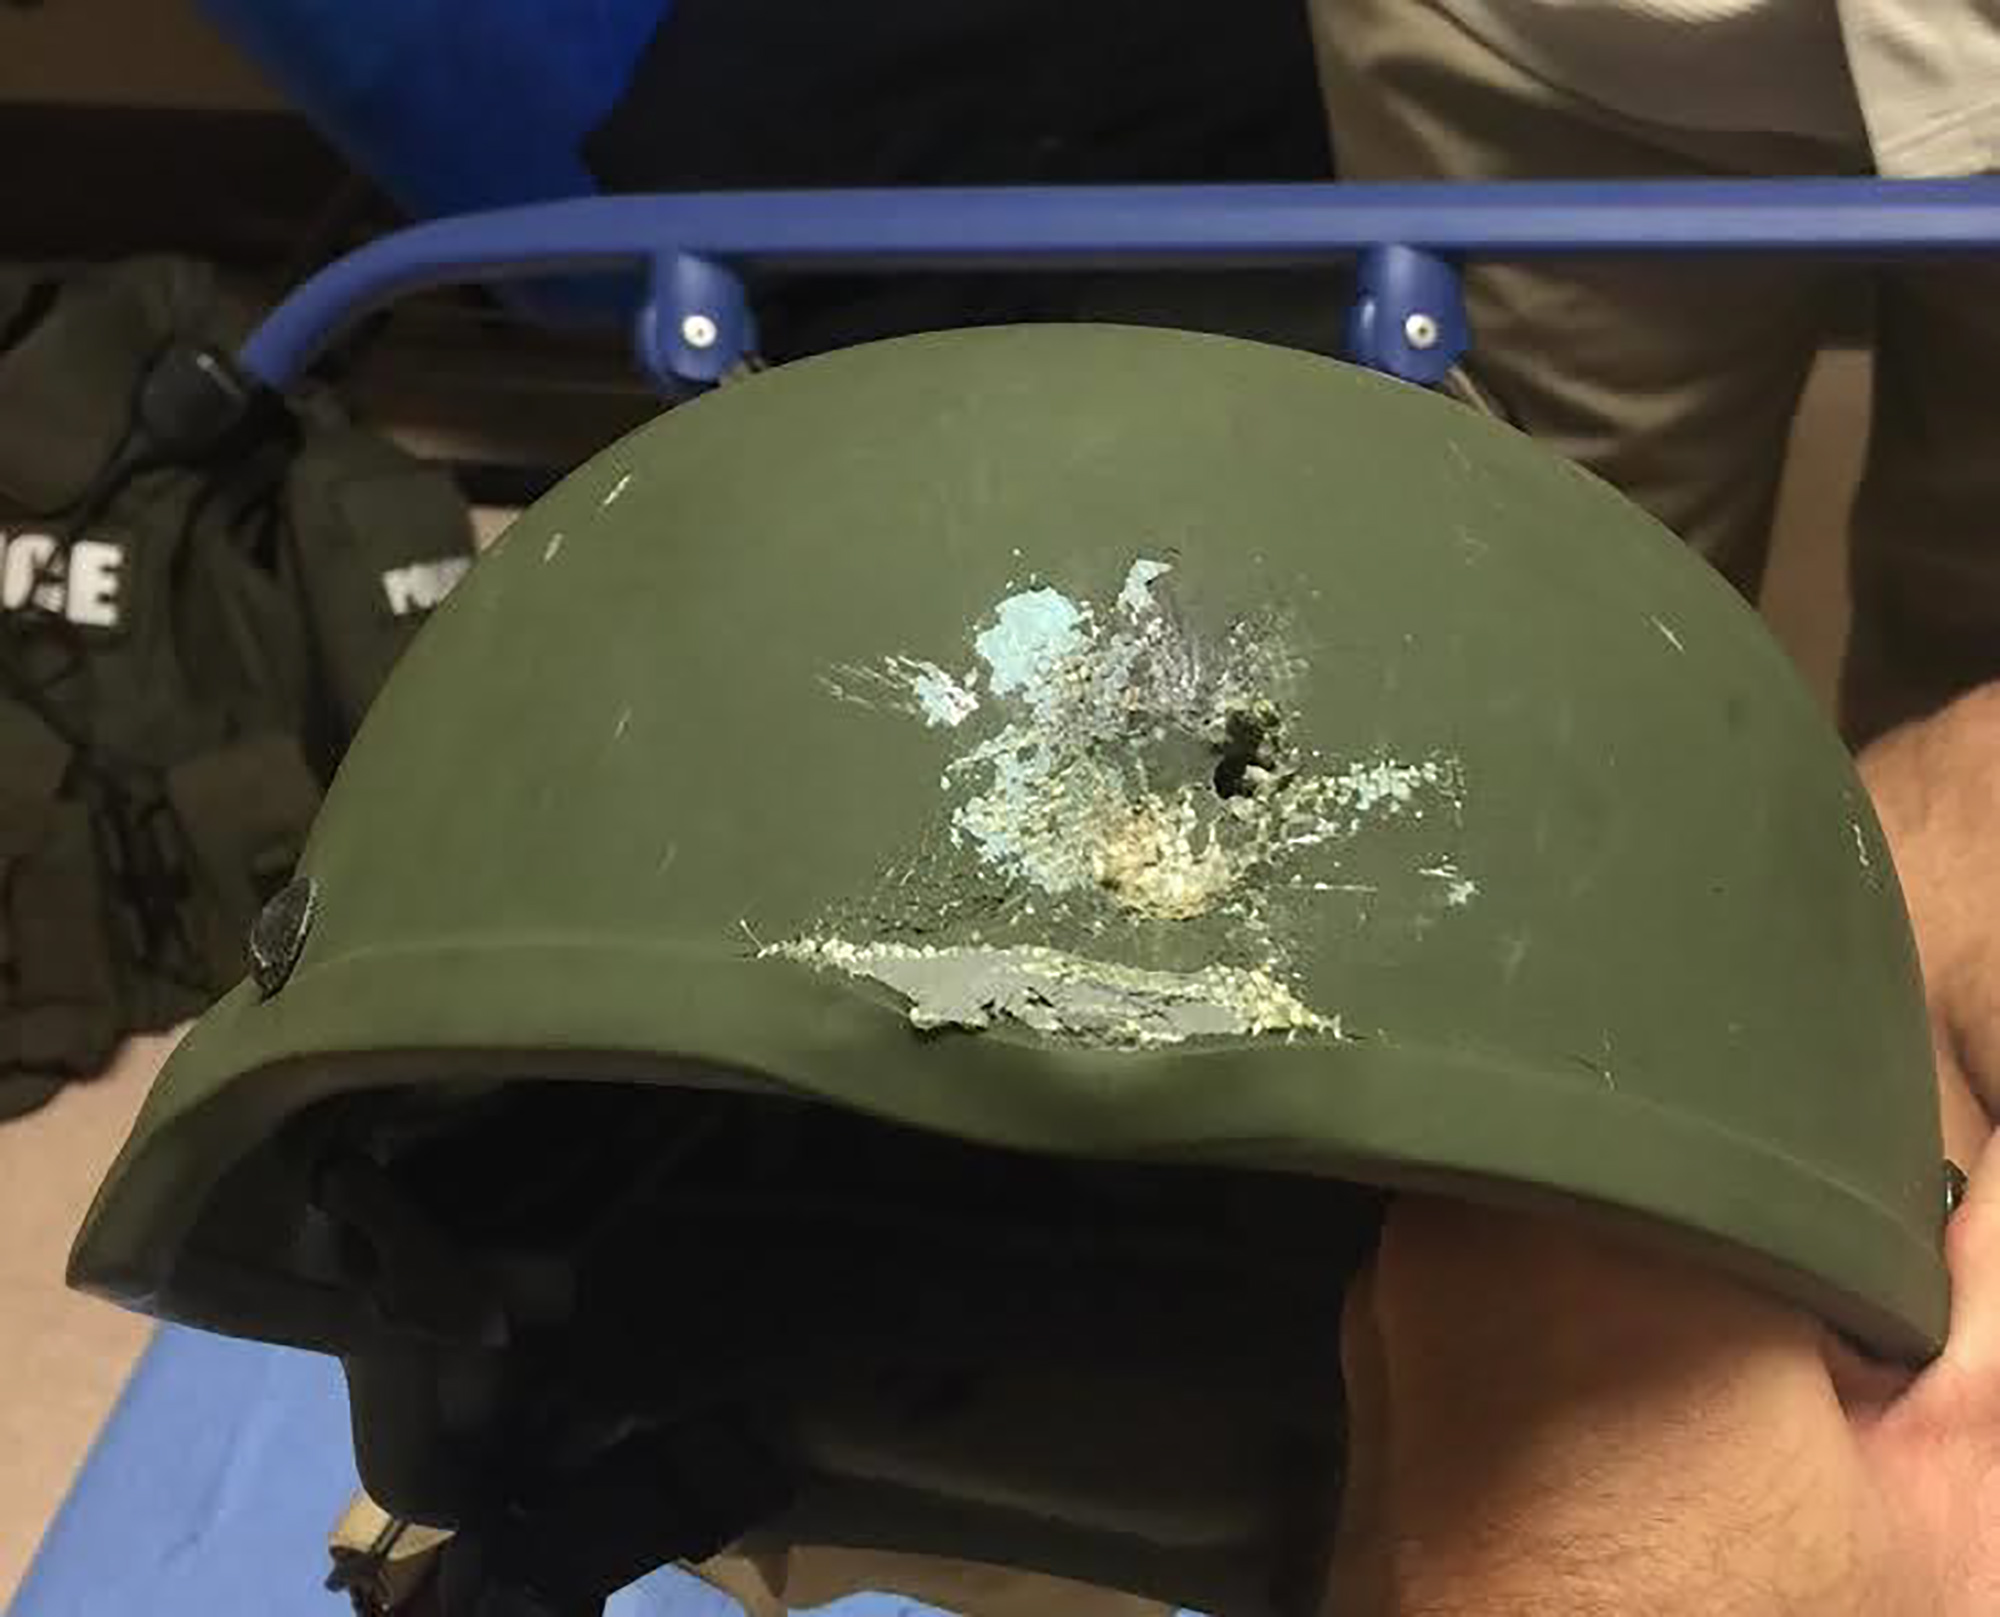 PHOTO: An image released by the Orlando Police shows the helmet of a SWAT officer who was struck in the head by gunfire while responding to the shooting at the Pulse Nightclub on June 12, 2016 in Orlando, Fla. 